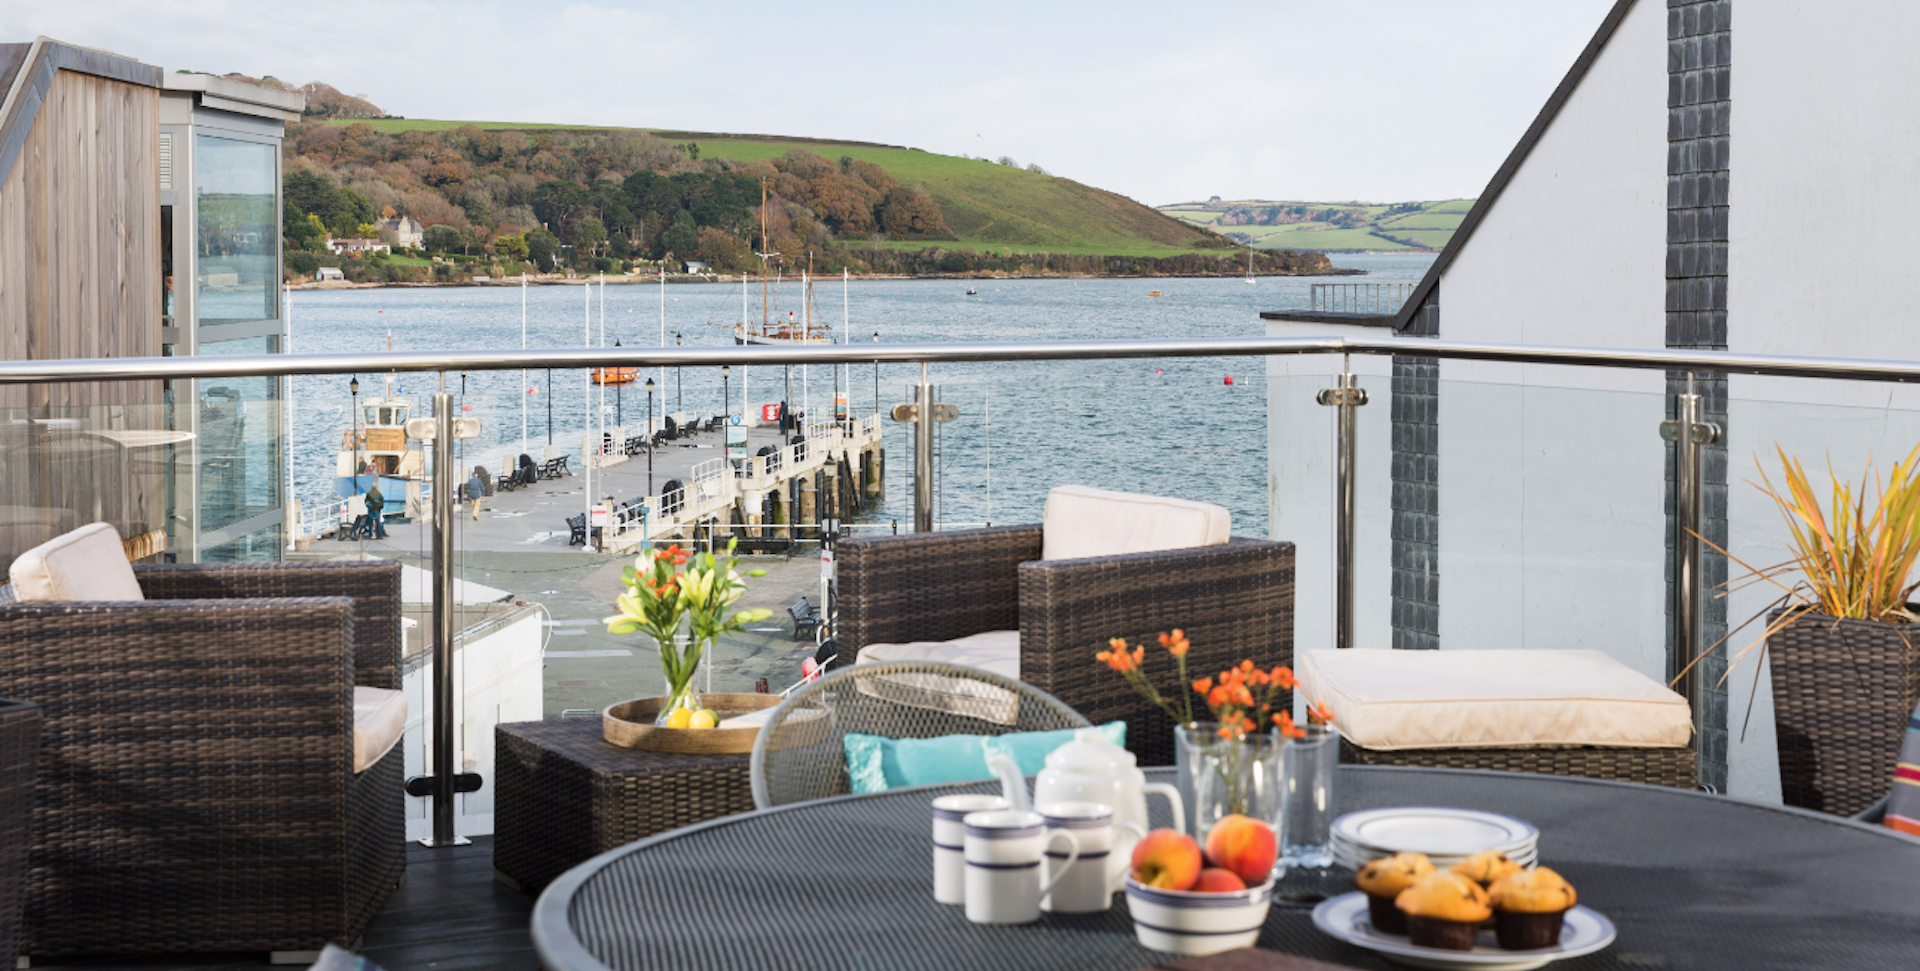 a table with a fuit bowl and wine glasses on a deck with wooden chairs overlooks Falmouth harbour, its small pier and the sea.